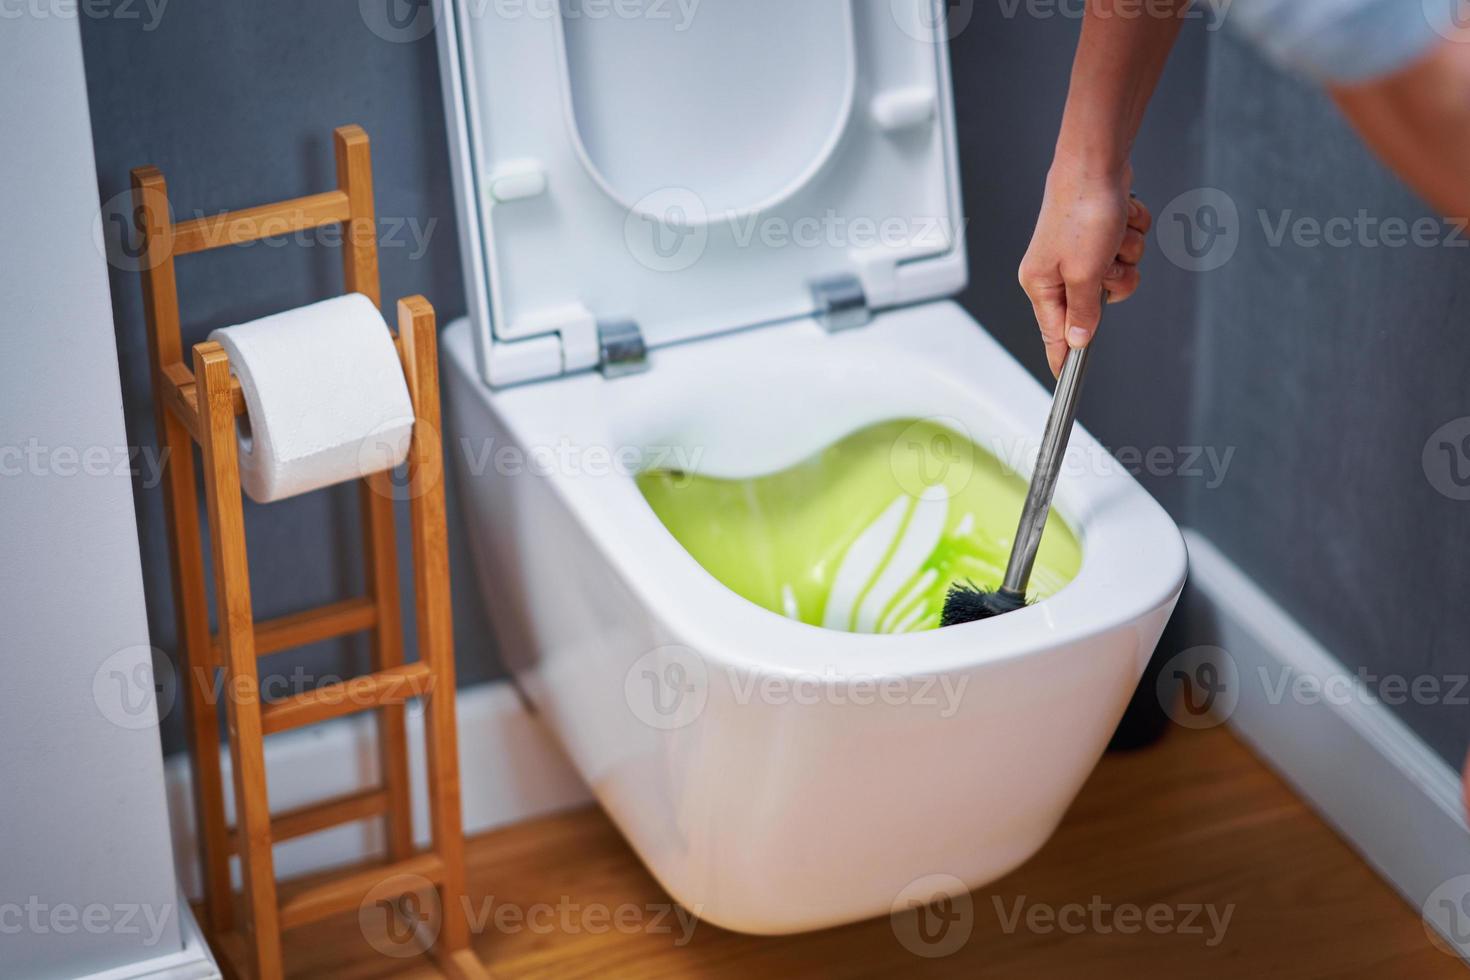 Picture of cleaning toilet seat with chemicals photo